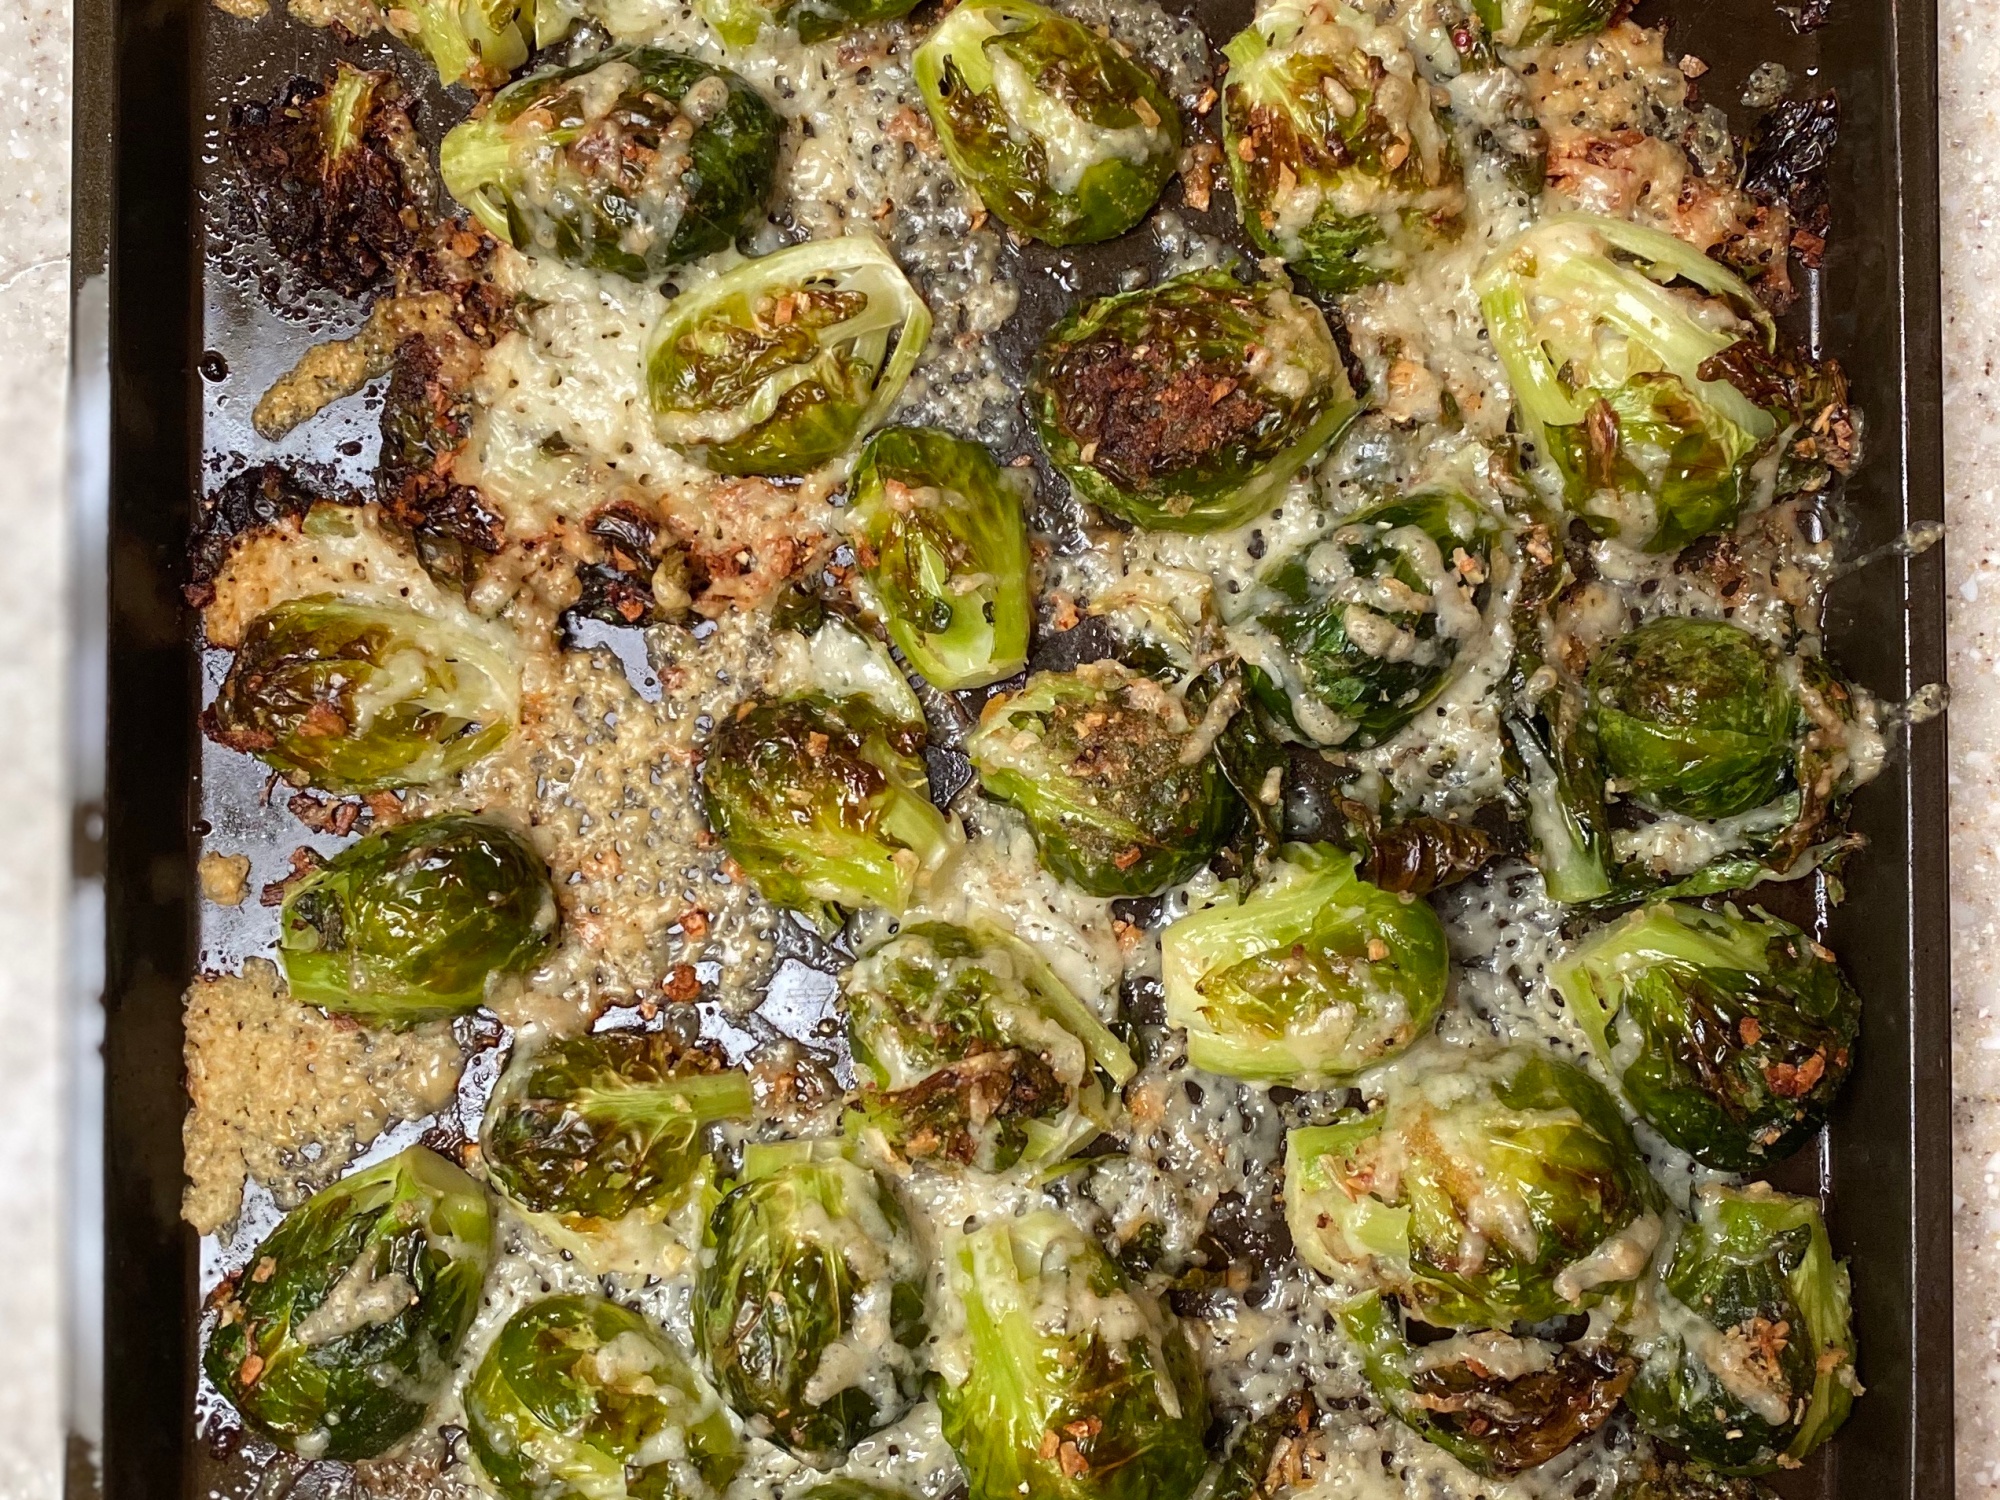 Brussels Sprouts, easy, quick, healthy eating, roasted veggies